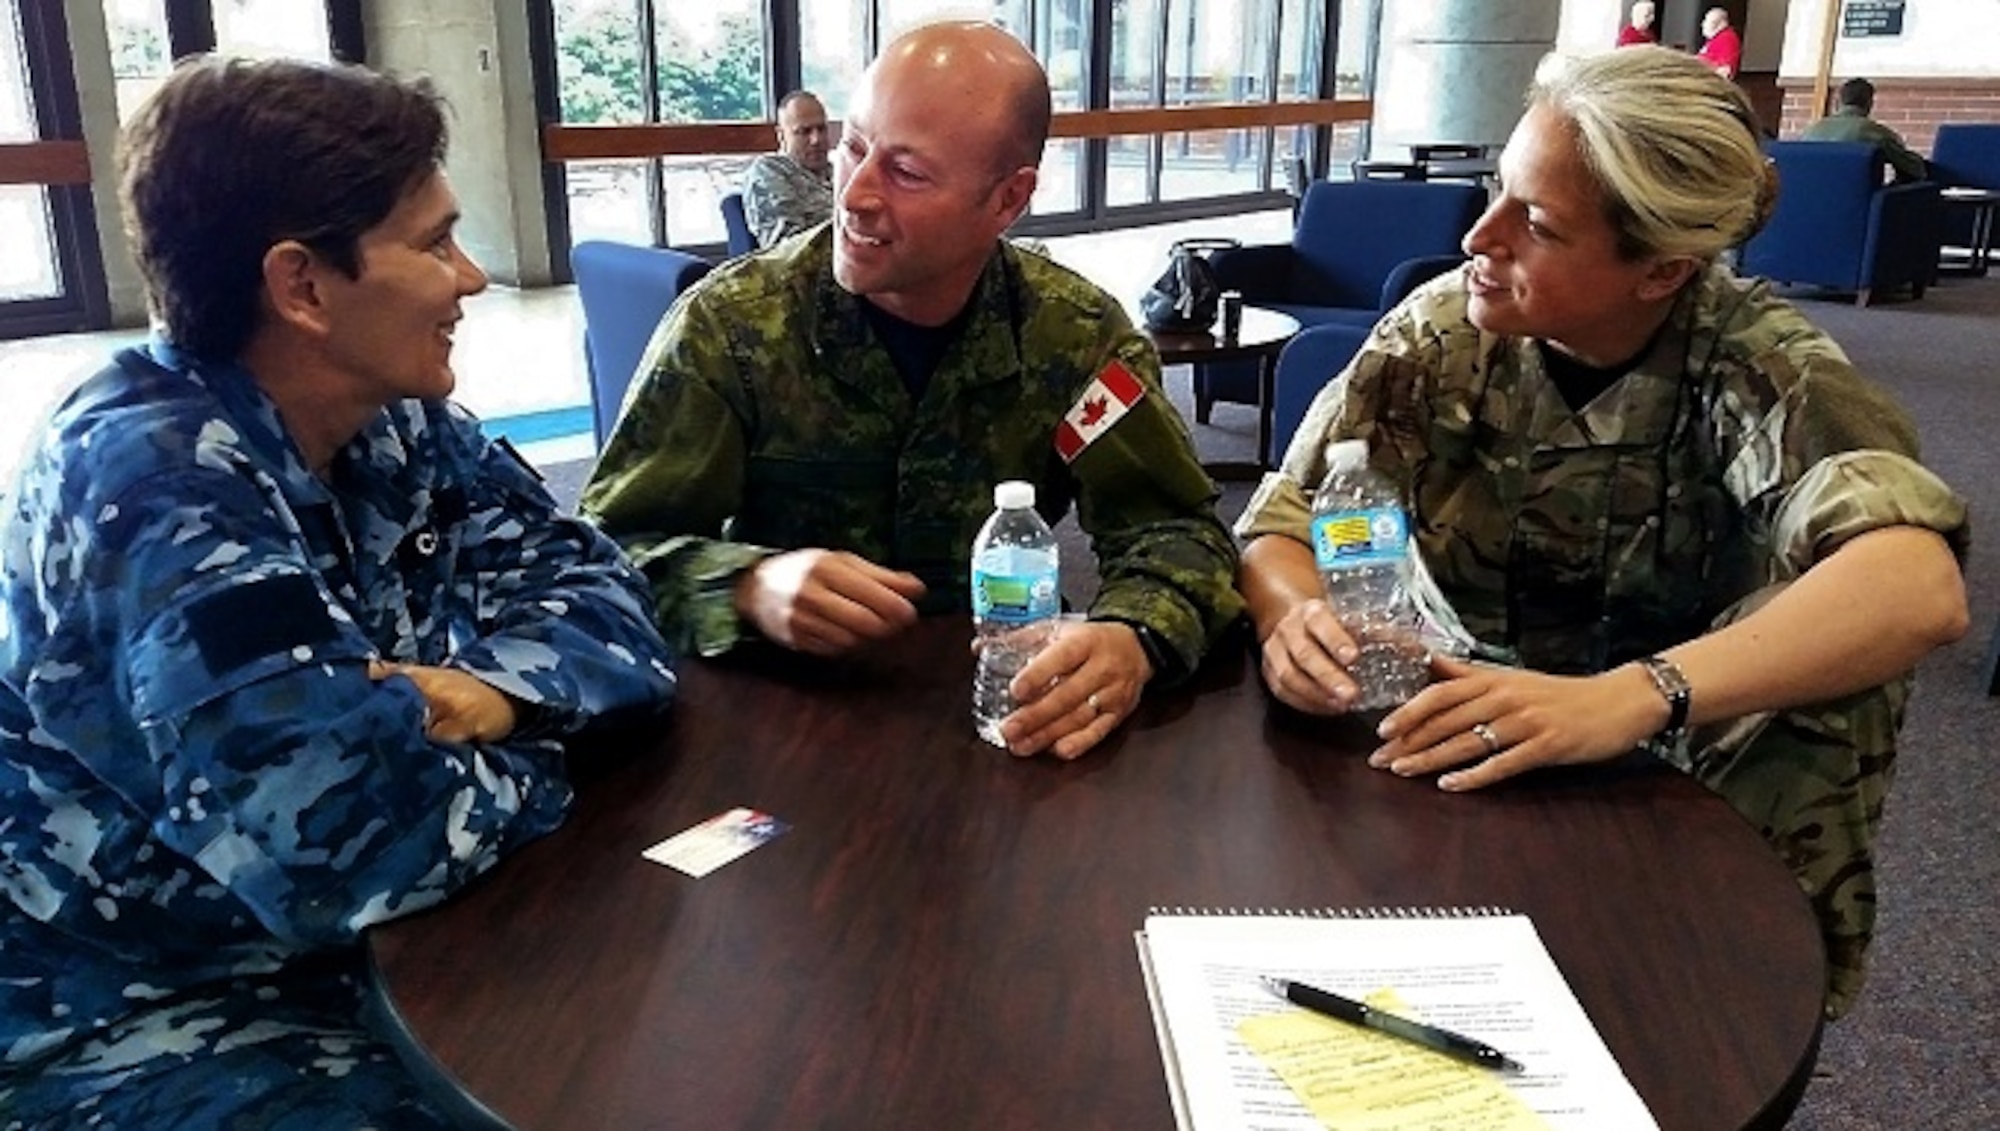 Wing Commmander Kate Carlisle, a logistics officer with the Royal Australian Air Force, Maj. Tony Pepin, the head of doctrine at the Canadian Air Warfare Center, and Squadron Leader Angela Robinson, an officer with United Kingdom's Royal Air Force, chat during a break in action of a wargame at the United States Air Force Expeditionary Center on Joint Base McGuire-Dix-Lakehurst, New Jersey, Jun. 24. The three officers contributed their subject-matter expertise to the wargame known as Global Mobility/Agile Combat Support, or GLOMO/ACS. (U.S. Air Force photo by Senior Master Sgt. Shawn J. Jones)